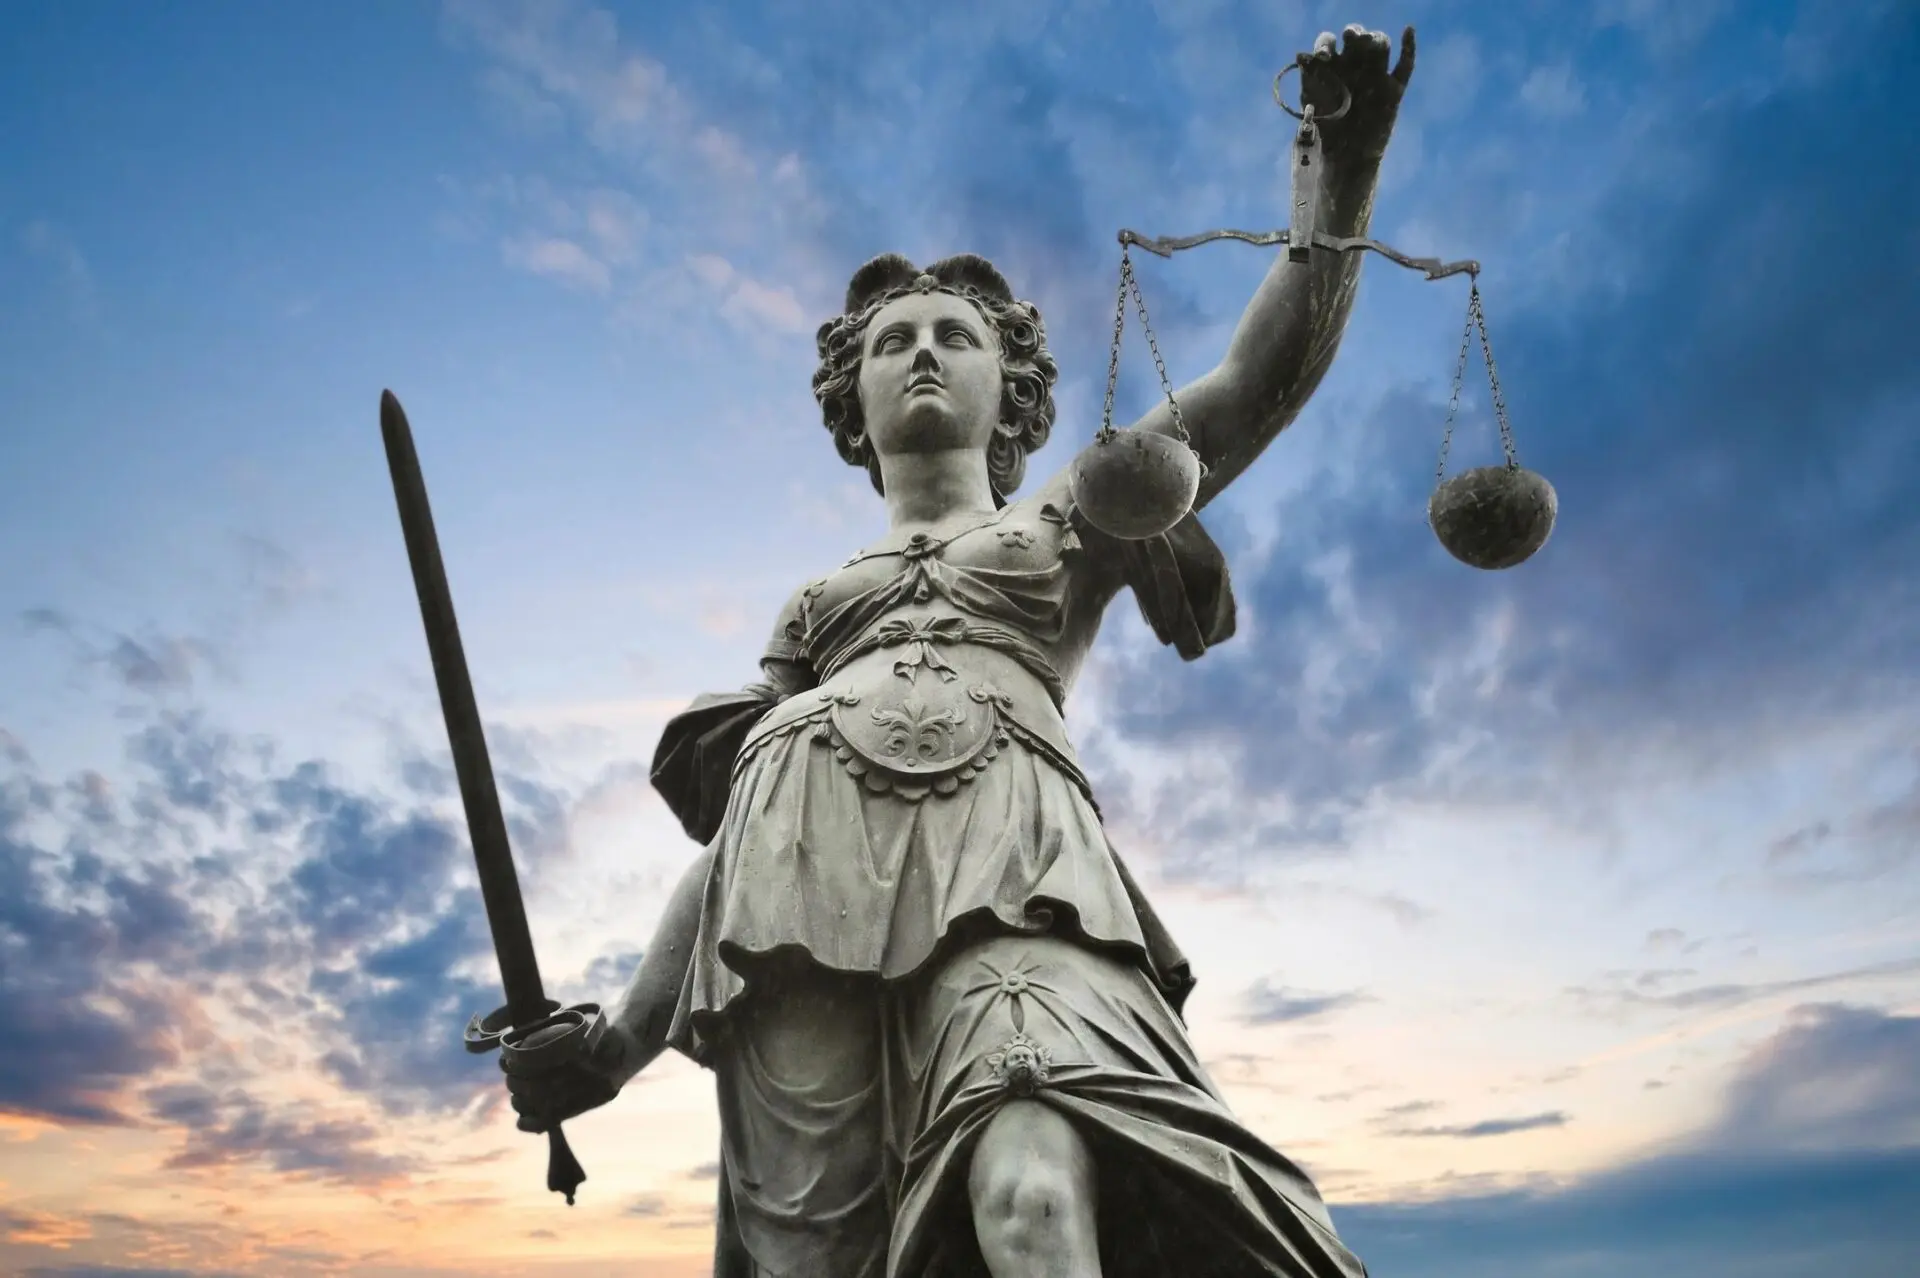 A statue of lady justice holding a sword and scales.